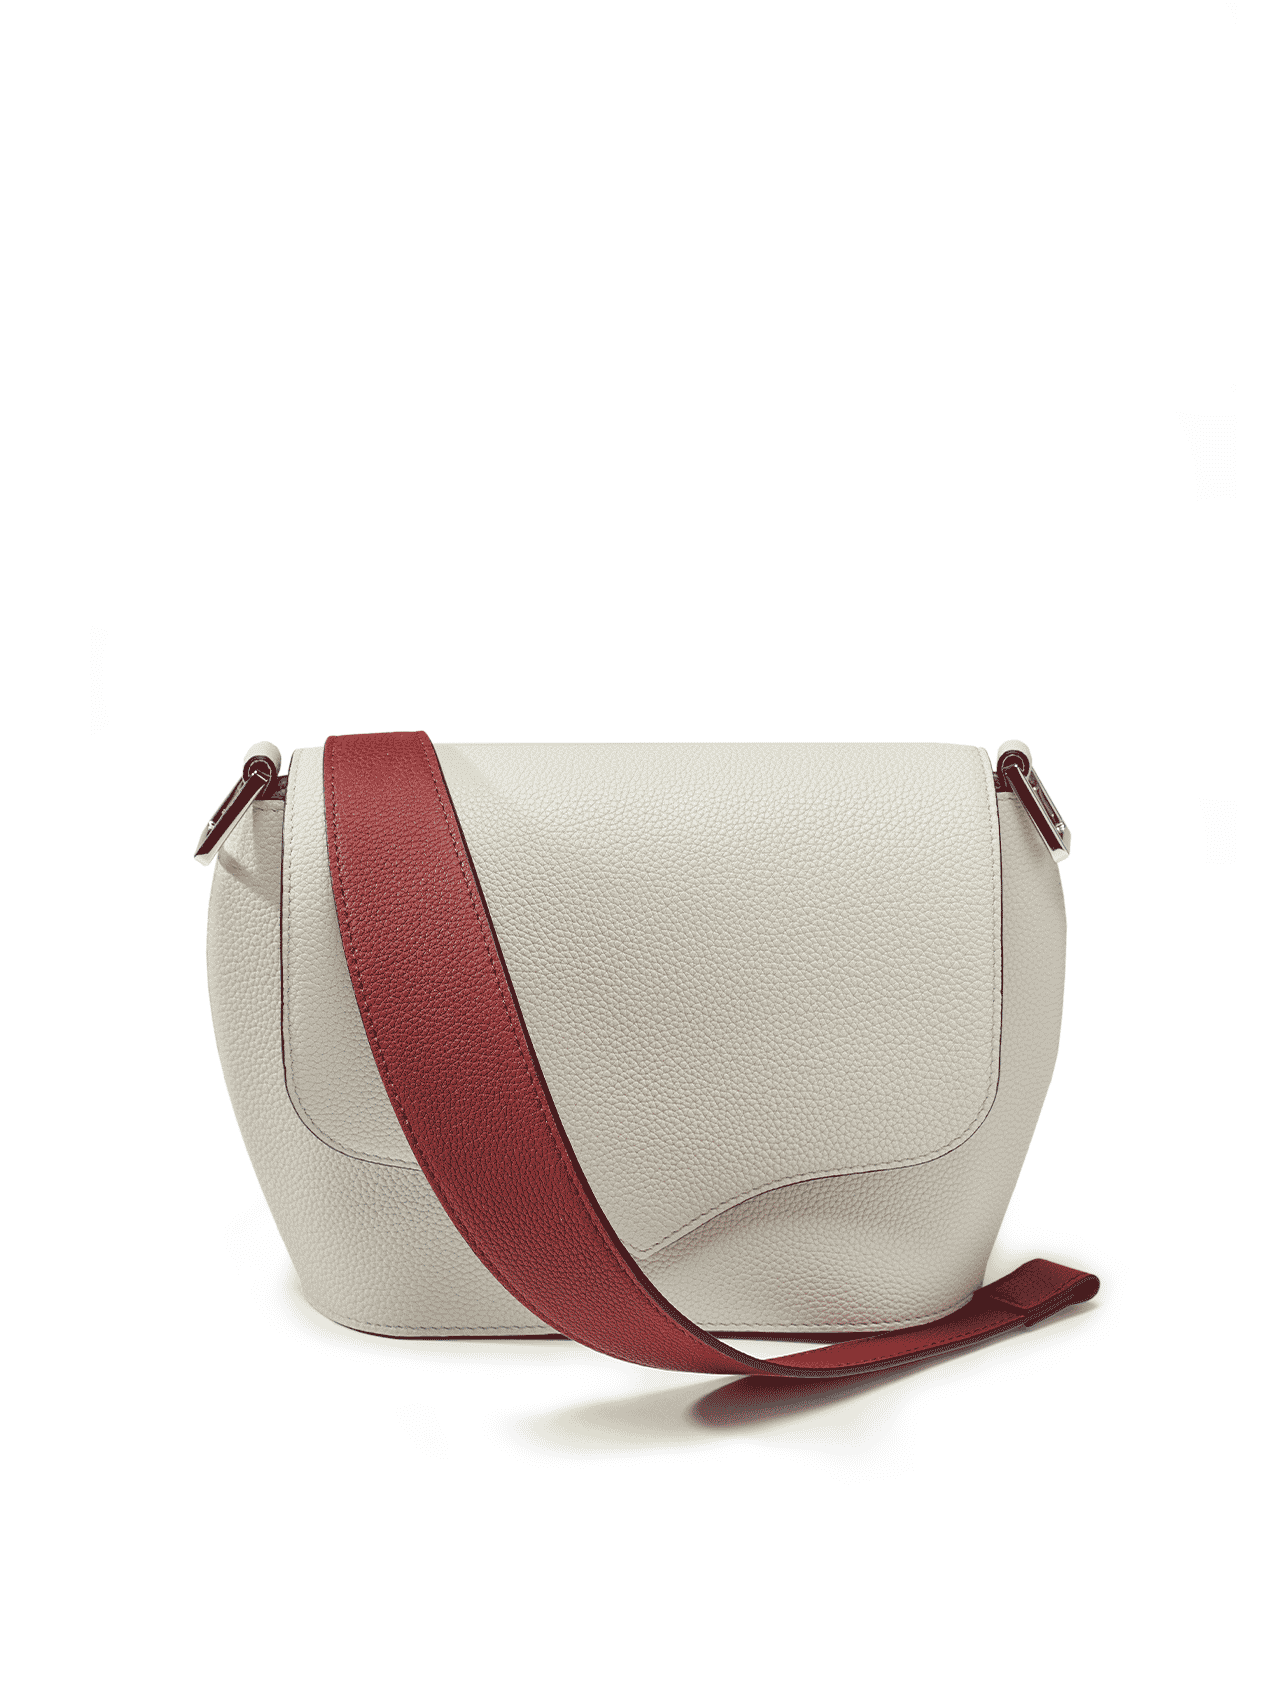 bag leather jean rousseau beige red white